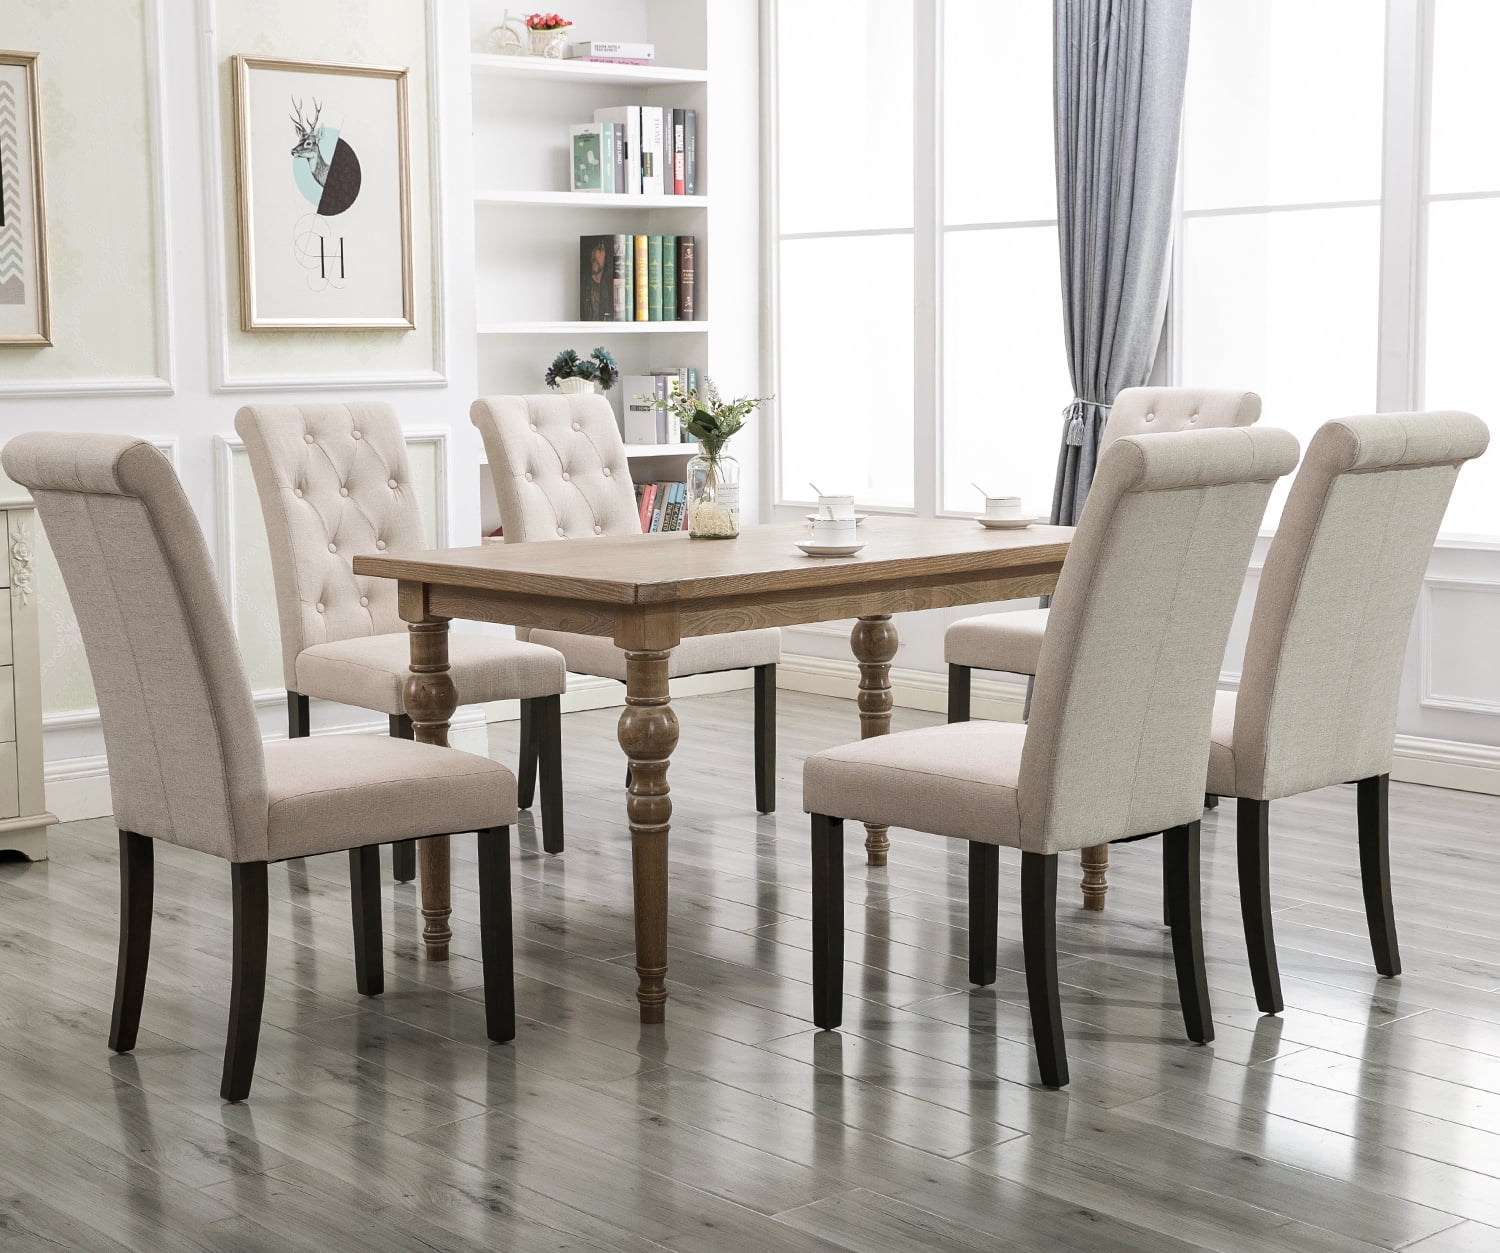 Clearance! Tufted Linen Dining Chairs with High Back and Solid Wood